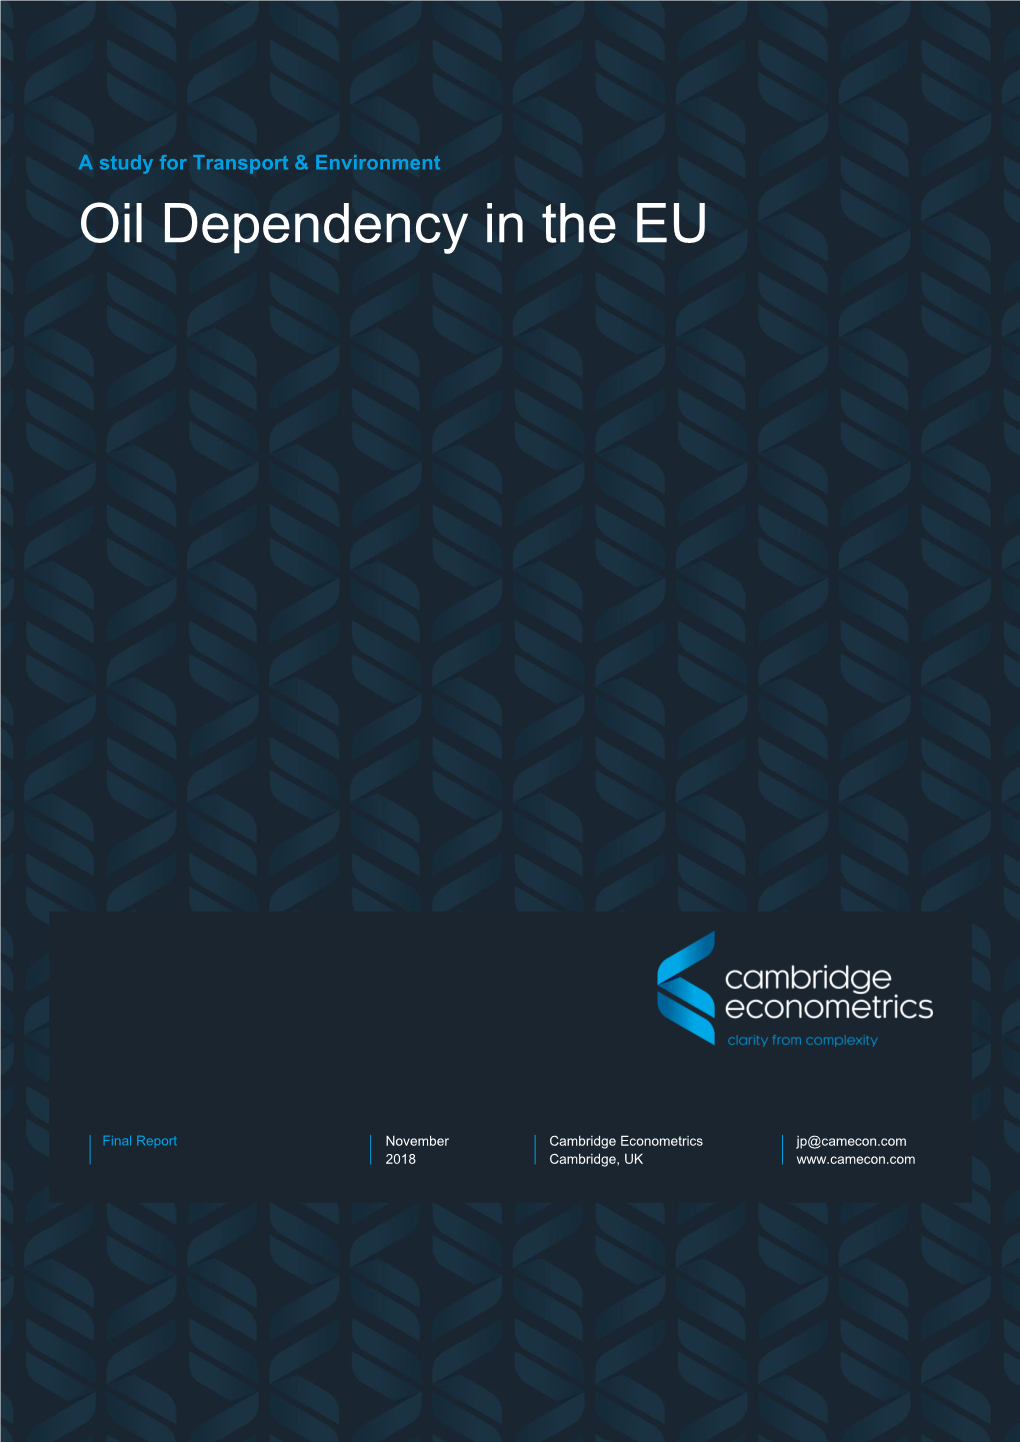 A Study on Oil Dependency in the EU